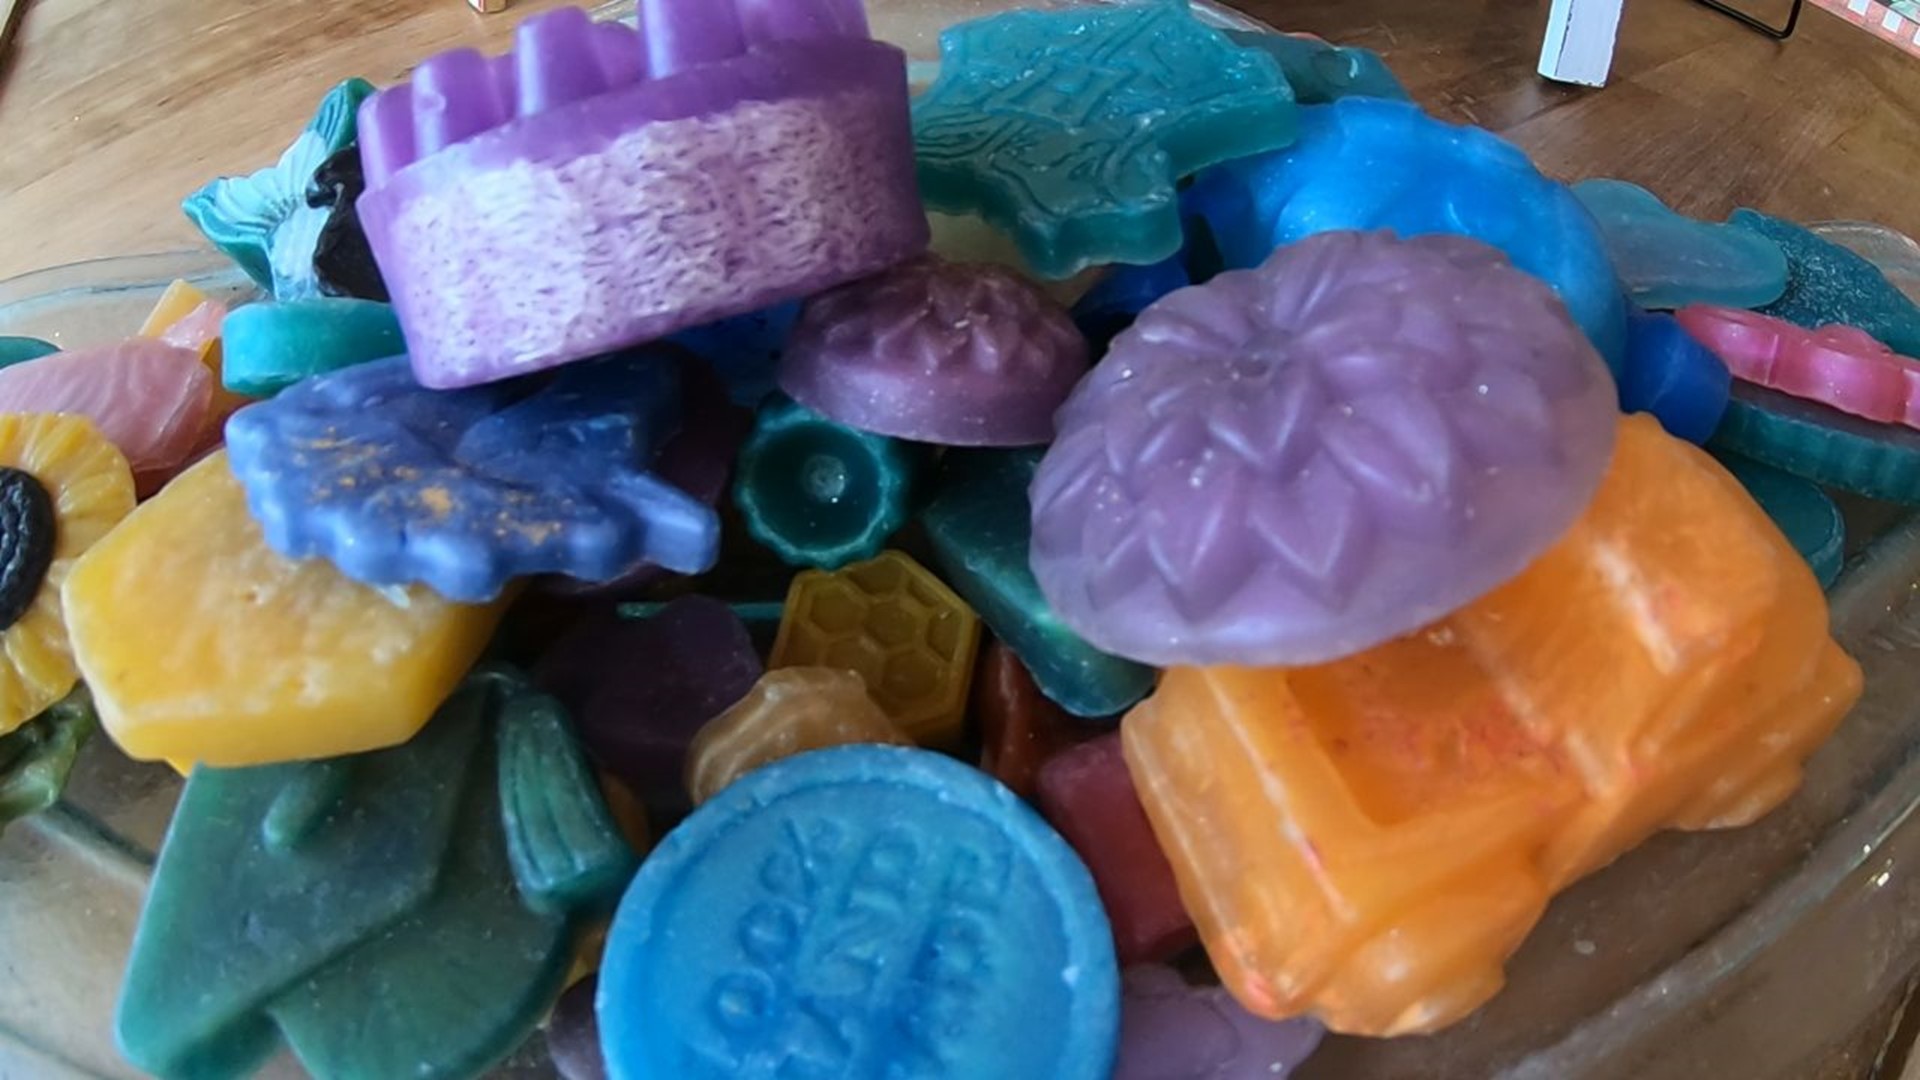 Sunrise Soap Co. in York lets customers make everything from soap to lip scrubs and jewelry to leather goods.